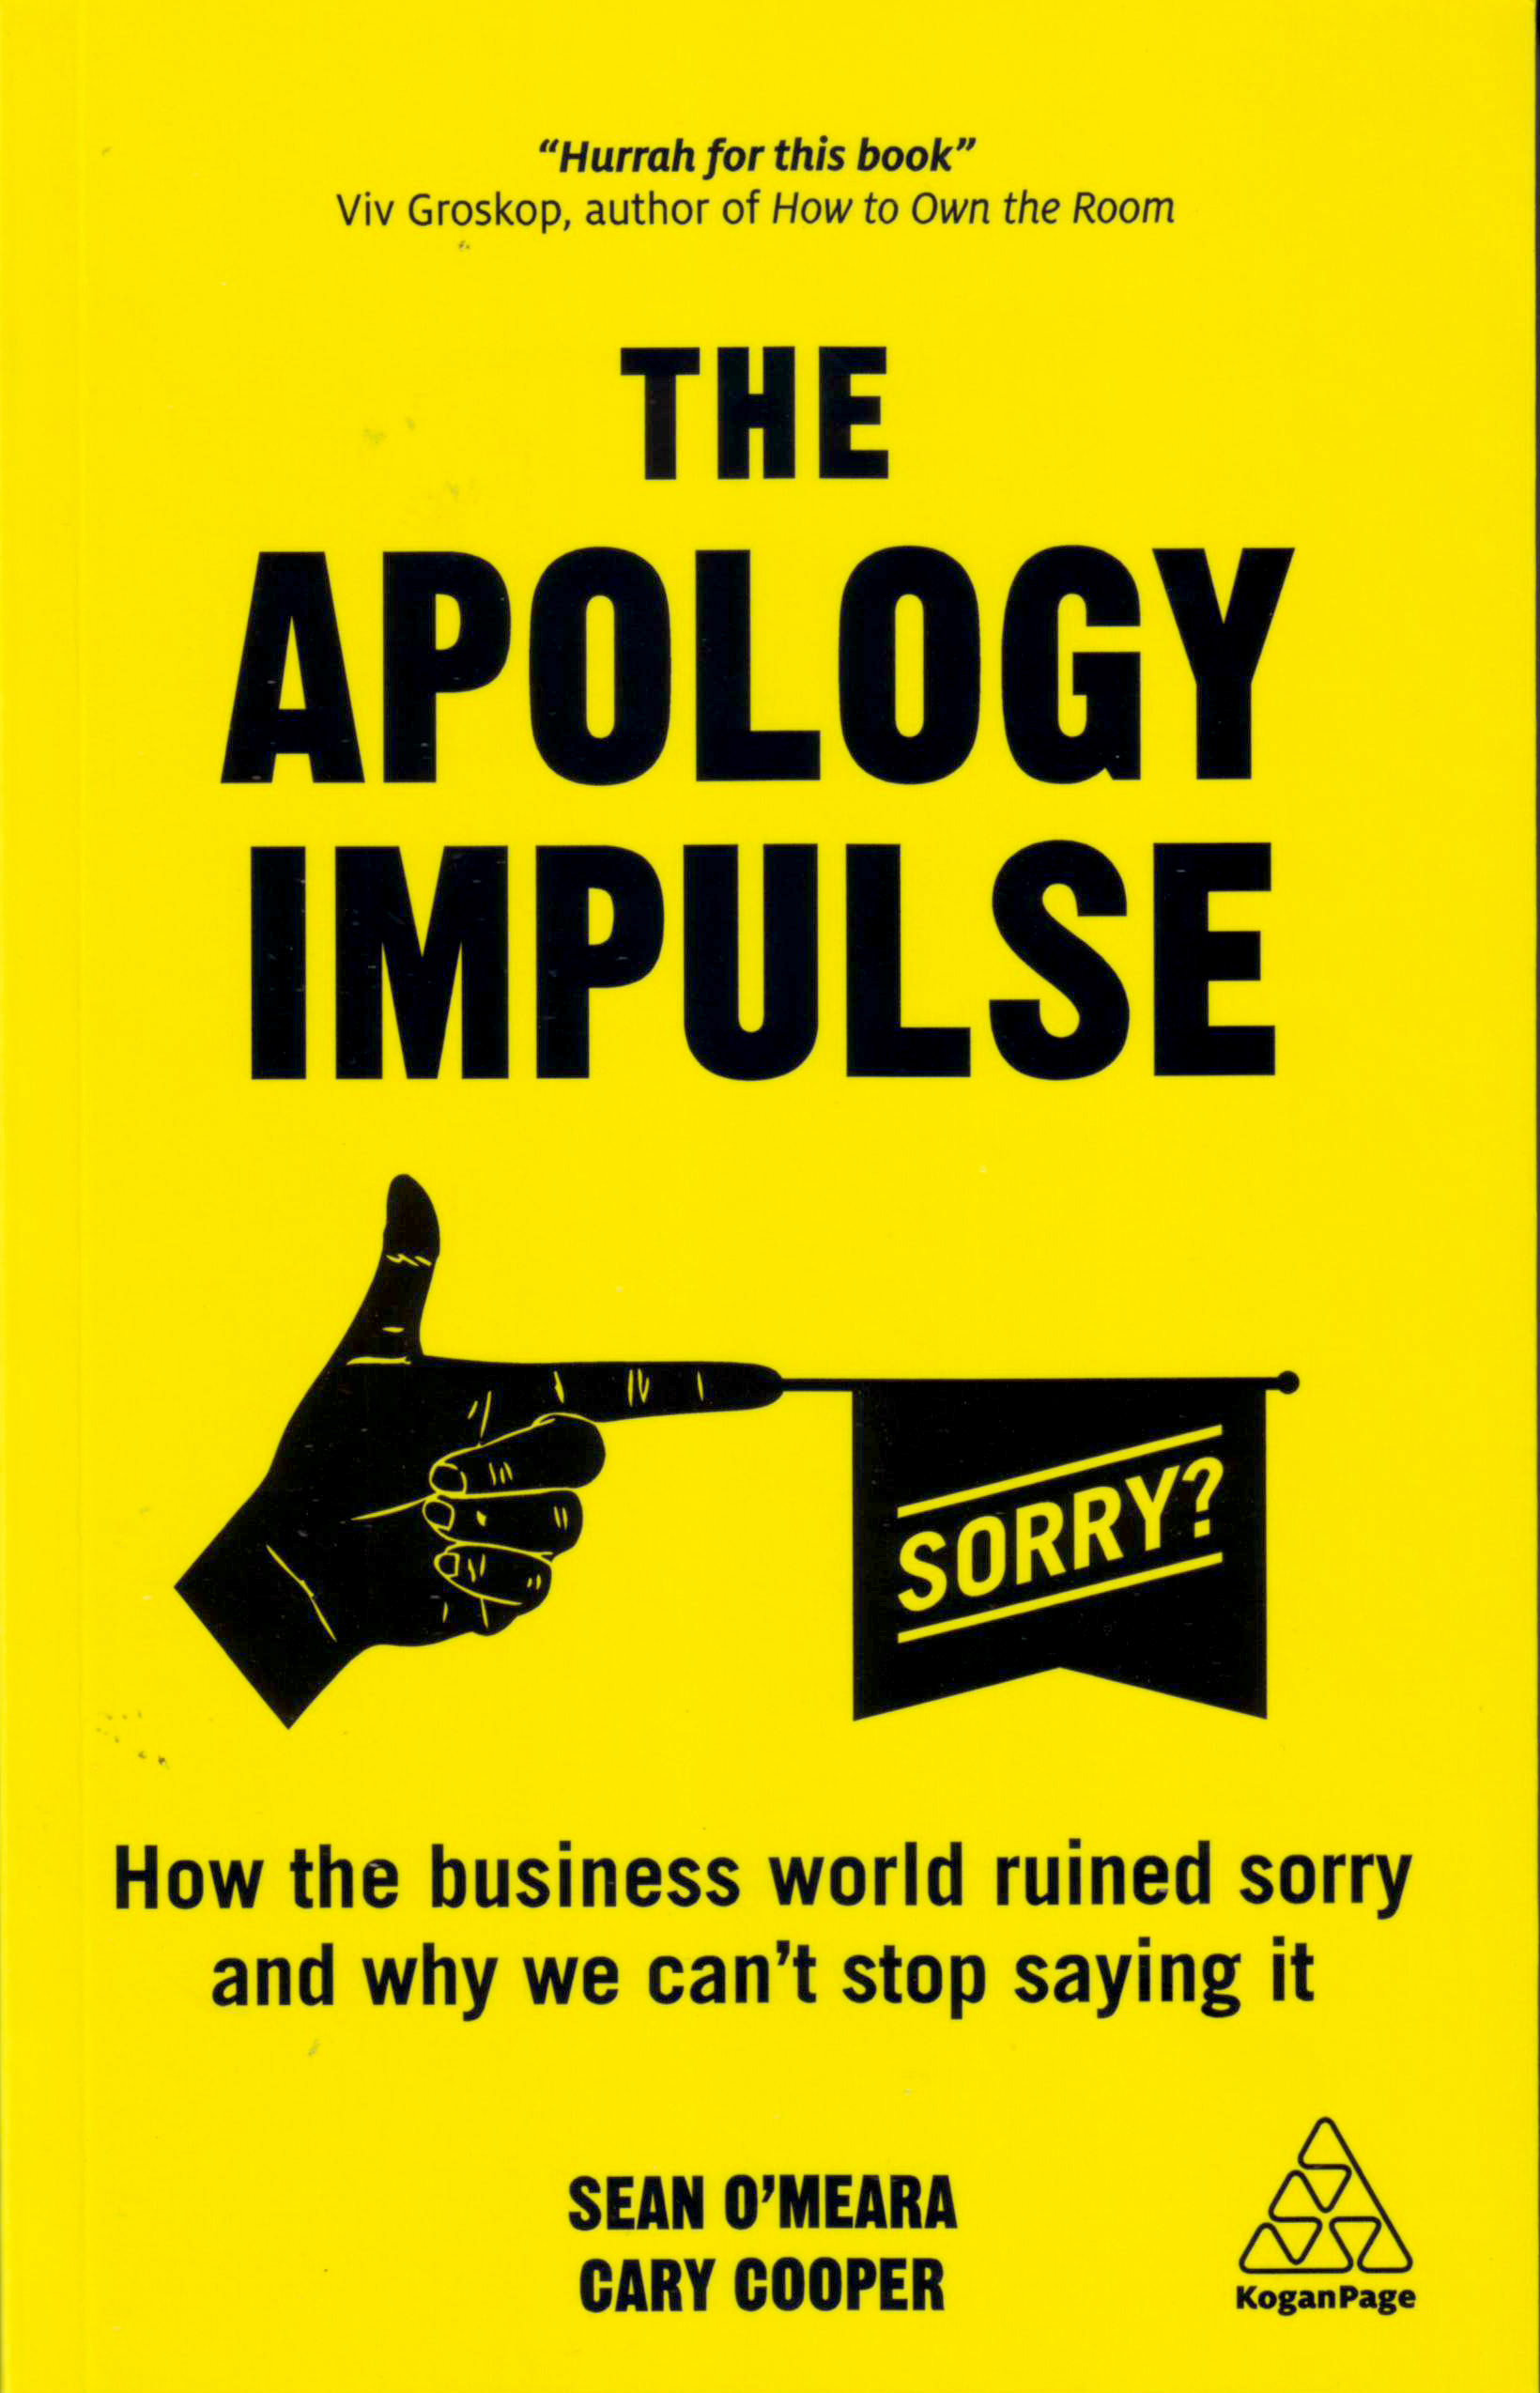 The Apology Impulse: How the Business World Ruined Sorry and